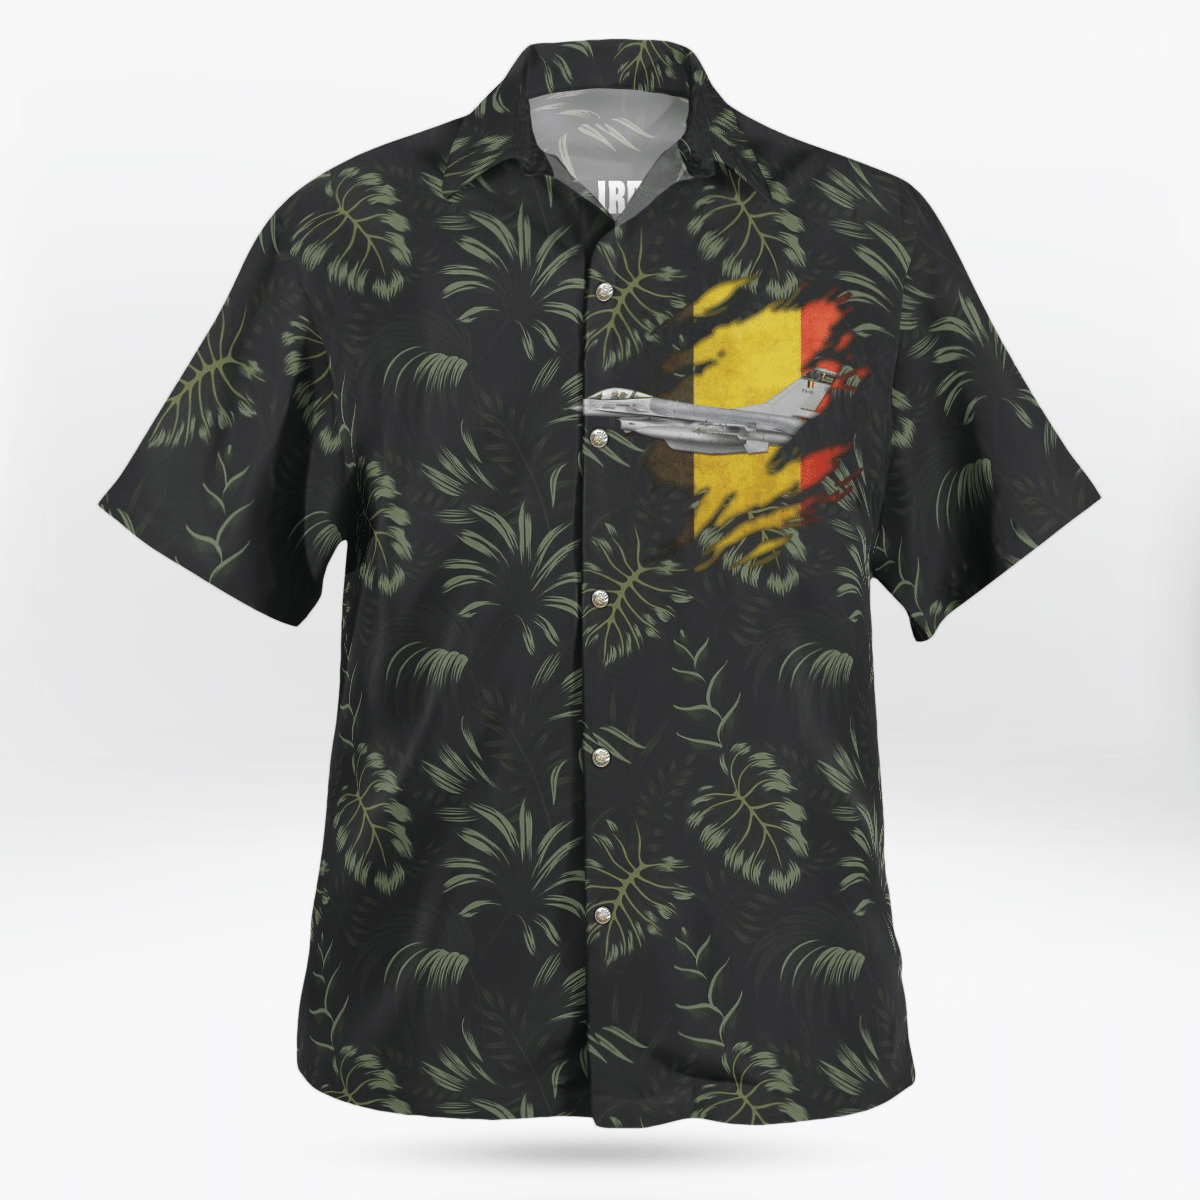 Hawaiian shirts never go out of style 39